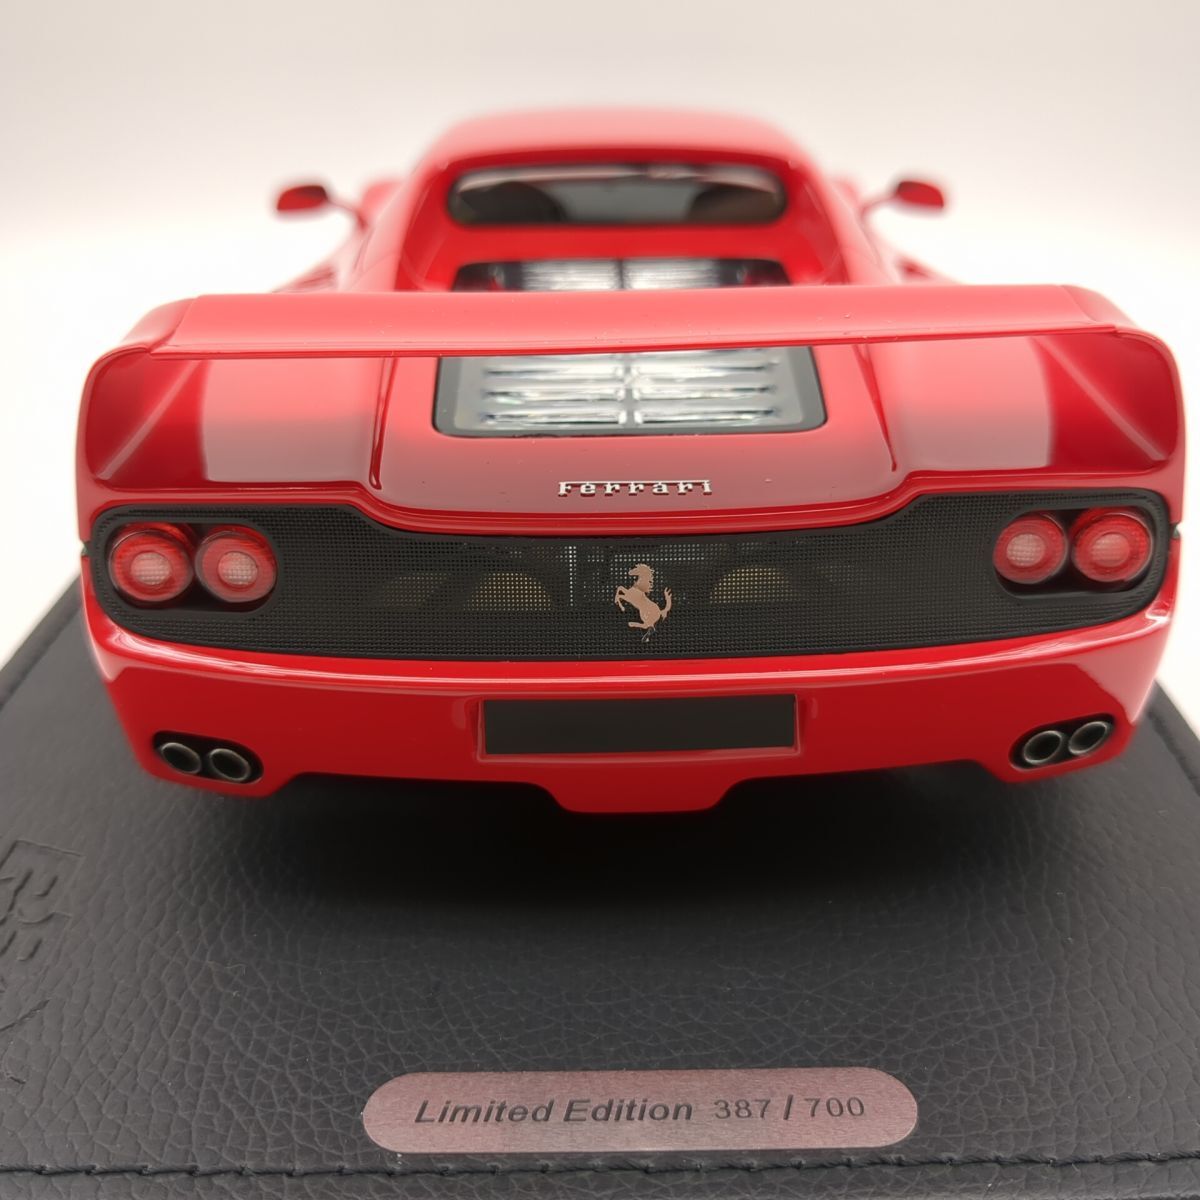 BBR MODELS　P18189A　フェラーリ　F50　Coupe　Rosso Corsa 322　レッド　1/18　ミニカー　700台限定　クリアケース付き　◆3109/宮竹店_画像4